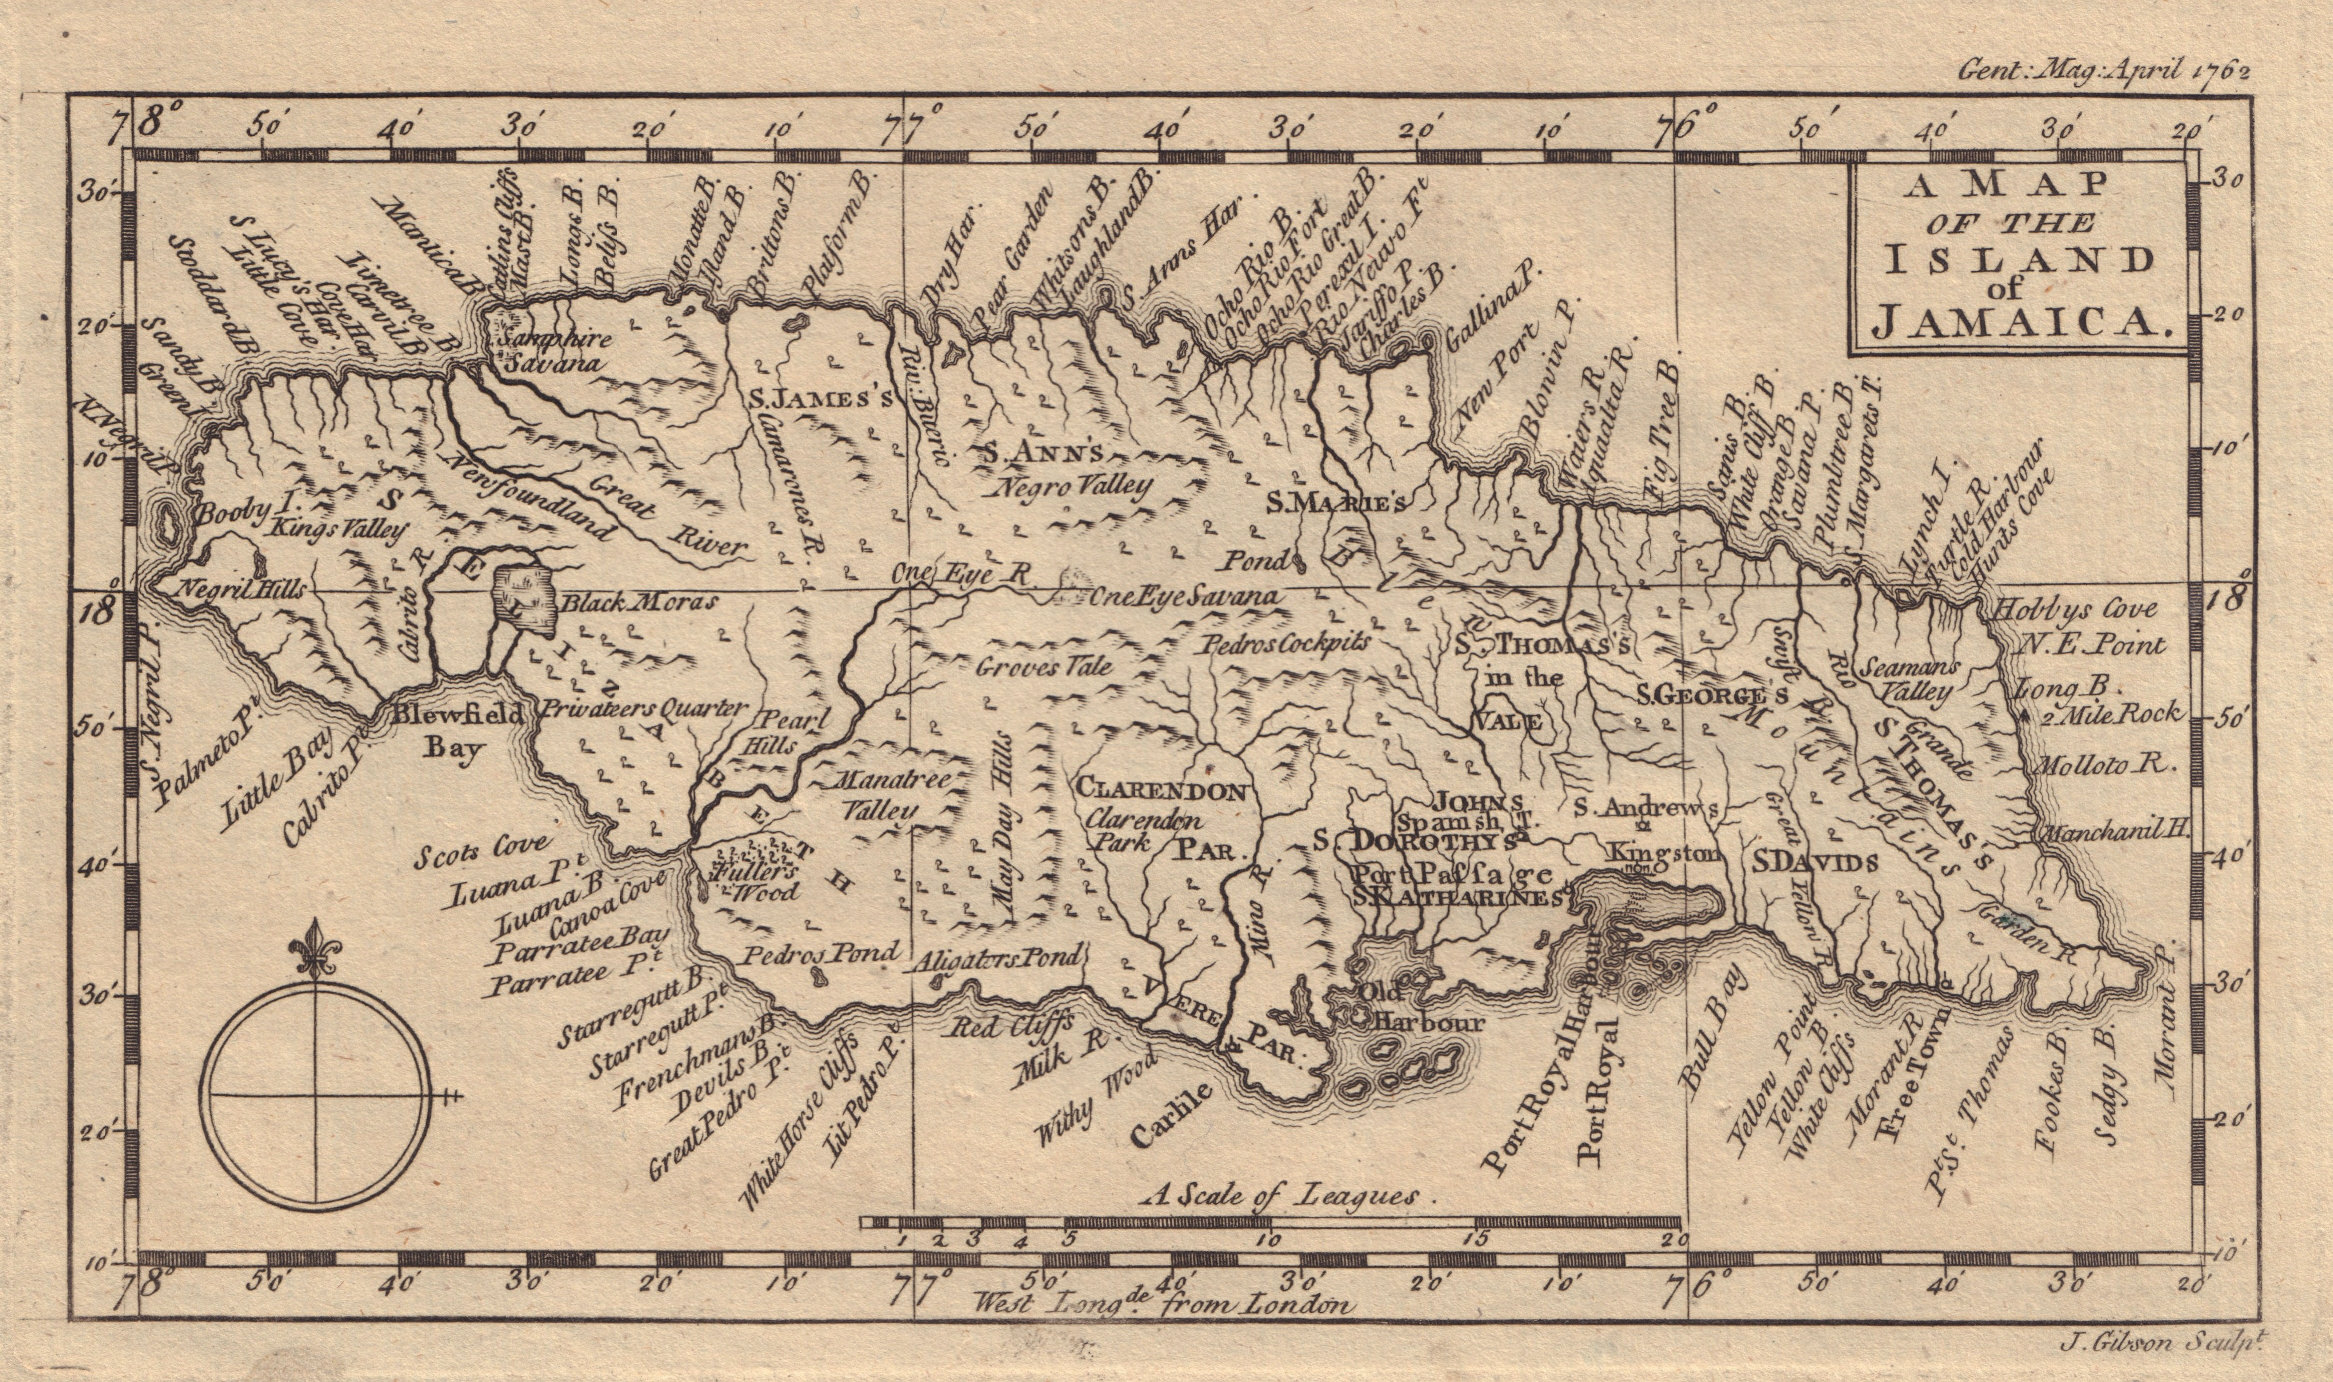 A Map of the Island of Jamaica by John Gibson. Gentleman's Magazine 1762